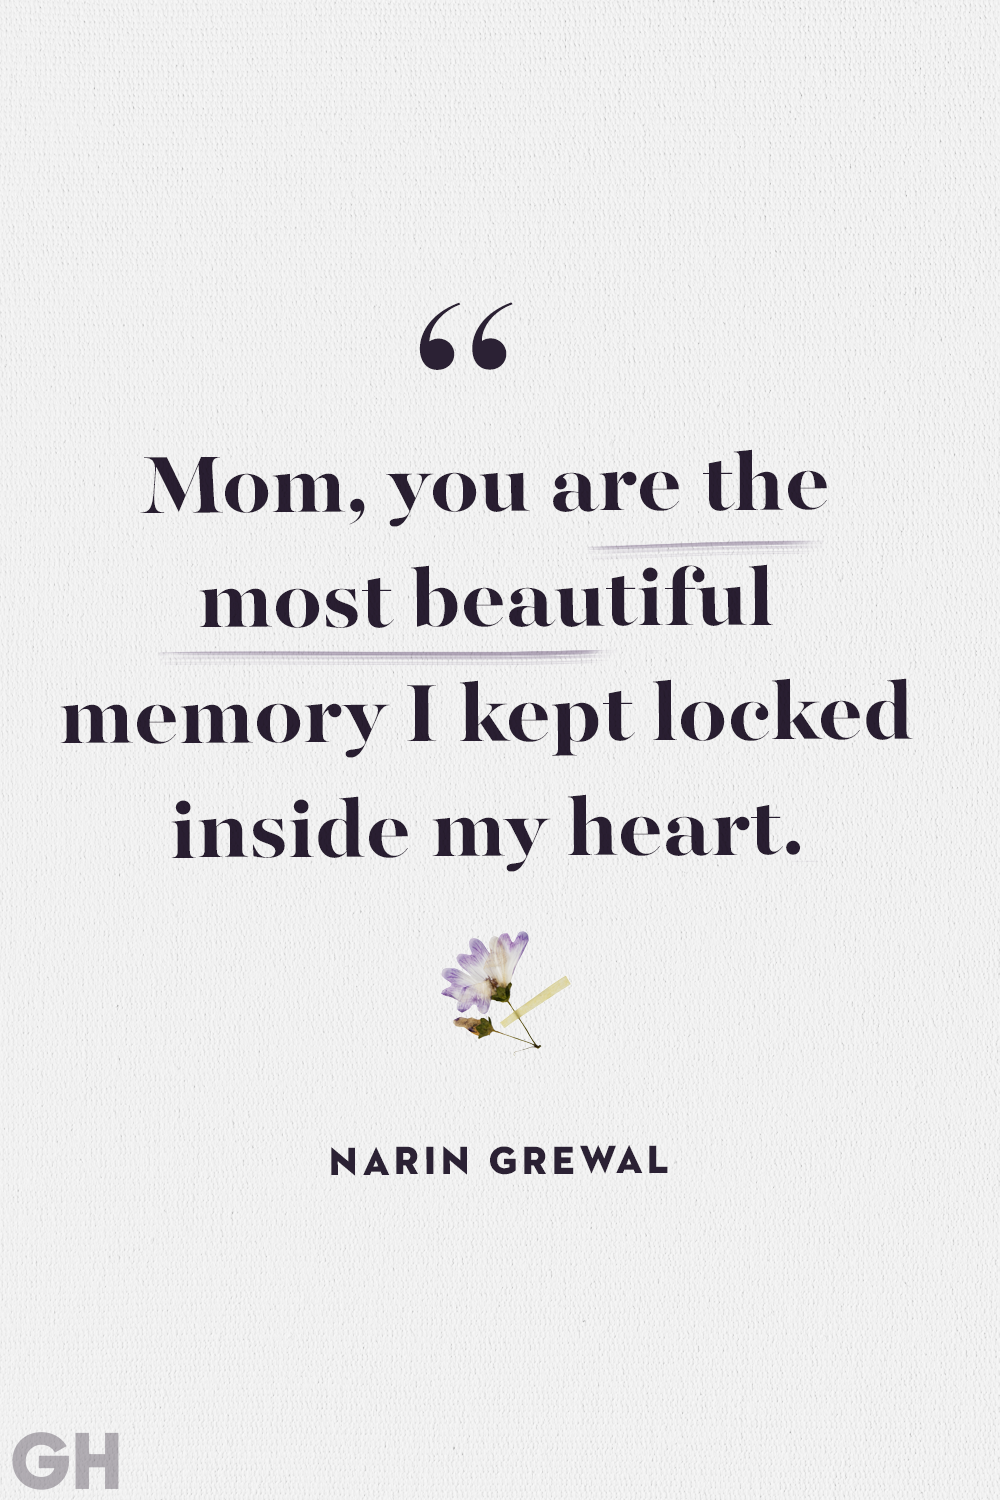 heaven quotes for mom